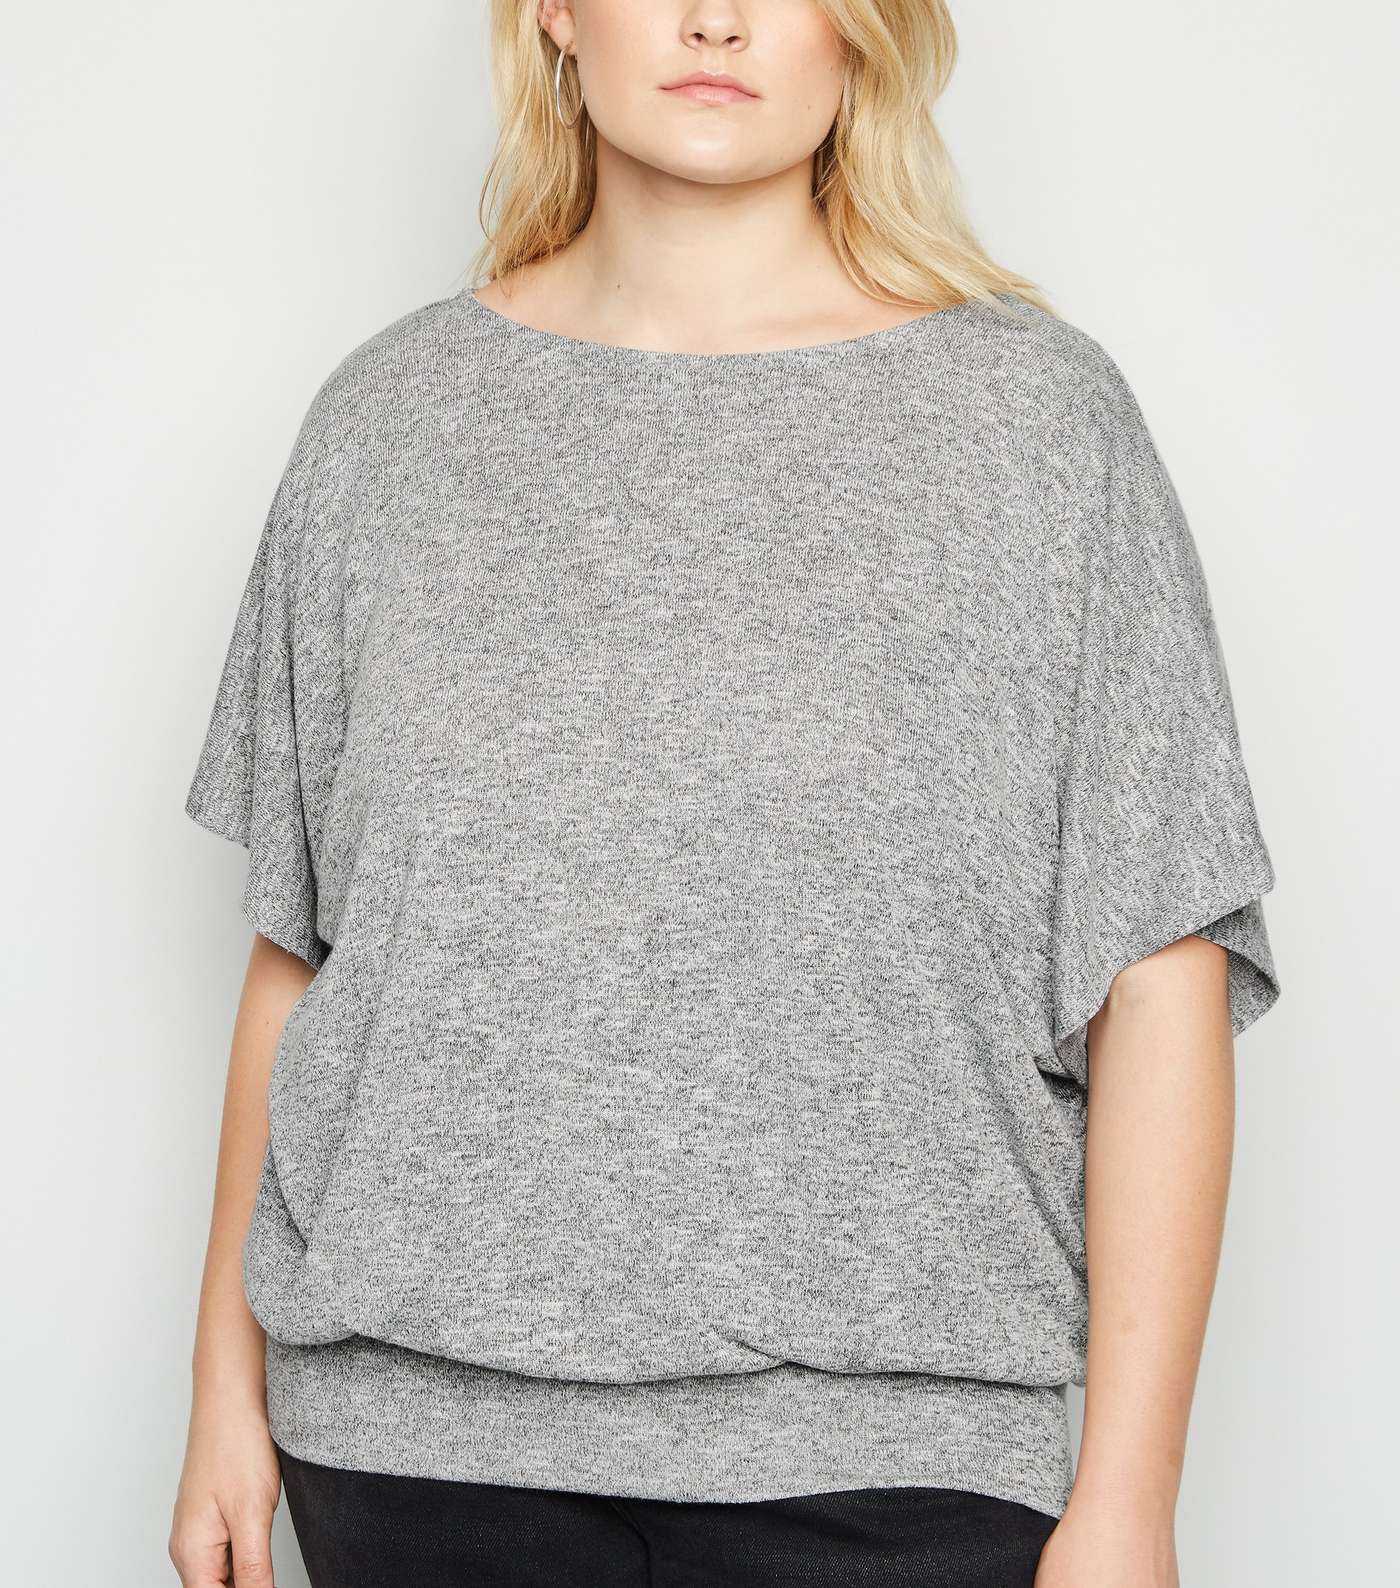 Curves Pale Grey Fine Knit Batwing Top